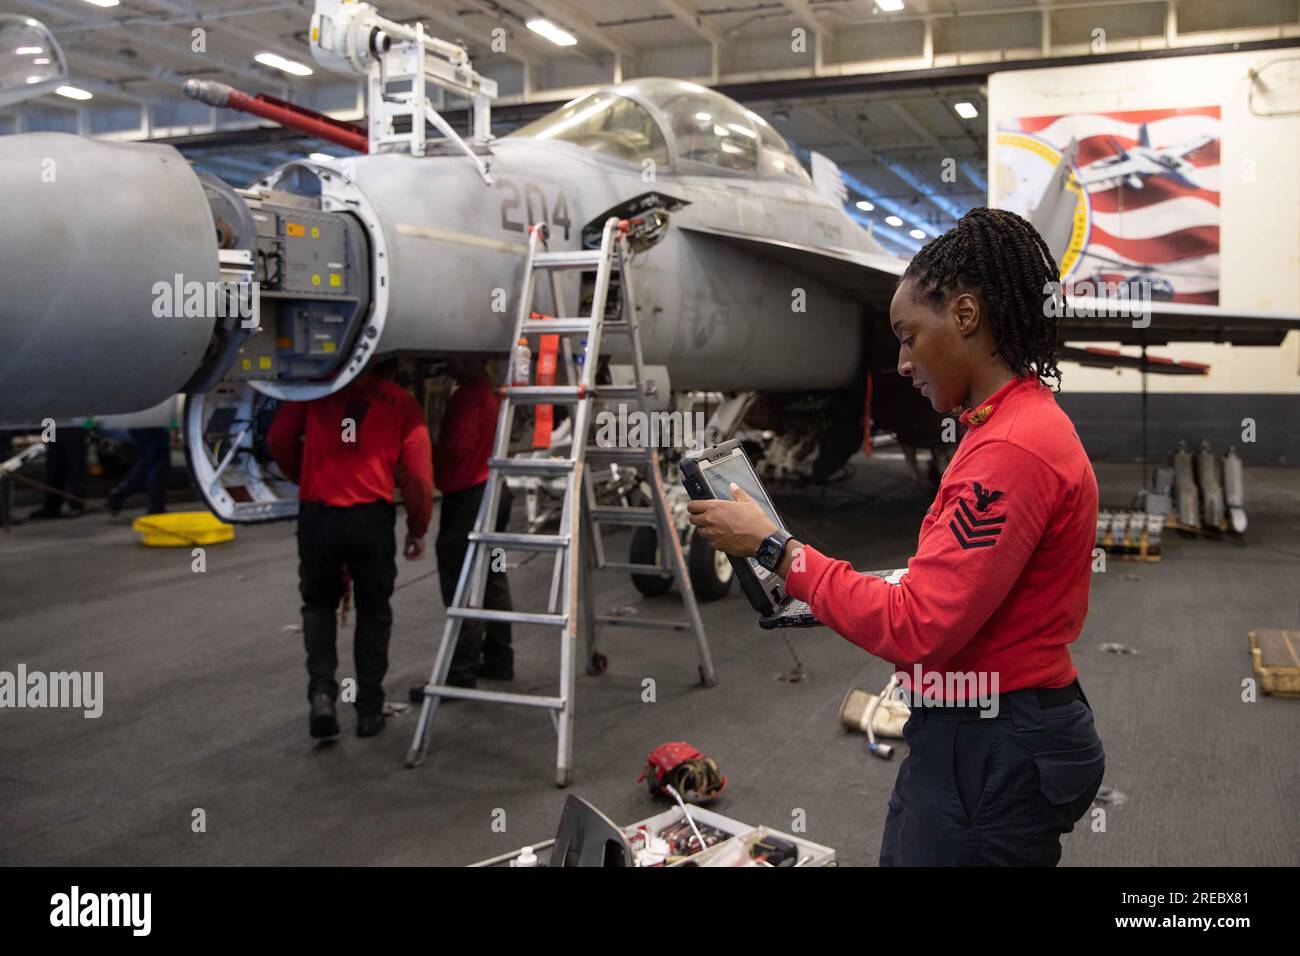 California, USA. 16th July, 2023. Aviation Ordnanceman 1st Class Rholanda Tucker, from Palmdale, California, assigned to the ''Blacklions'' of Strike Fighter Squadron (VFA) 213, conducts routine maintenance on the 20mm gun from an F/A-18F Super Hornet in the hangar bay of the world's largest aircraft carrier USS Gerald R. Ford (CVN 78), July 16, 2023. Gerald R. Ford is the U.S. Navy's newest and most advanced aircraft carrier, representing a generational leap in the U.S. Navy's capacity to project power on a global scale. The Gerald R. Ford Carrier Strike Group is on a scheduled deployment in Stock Photo